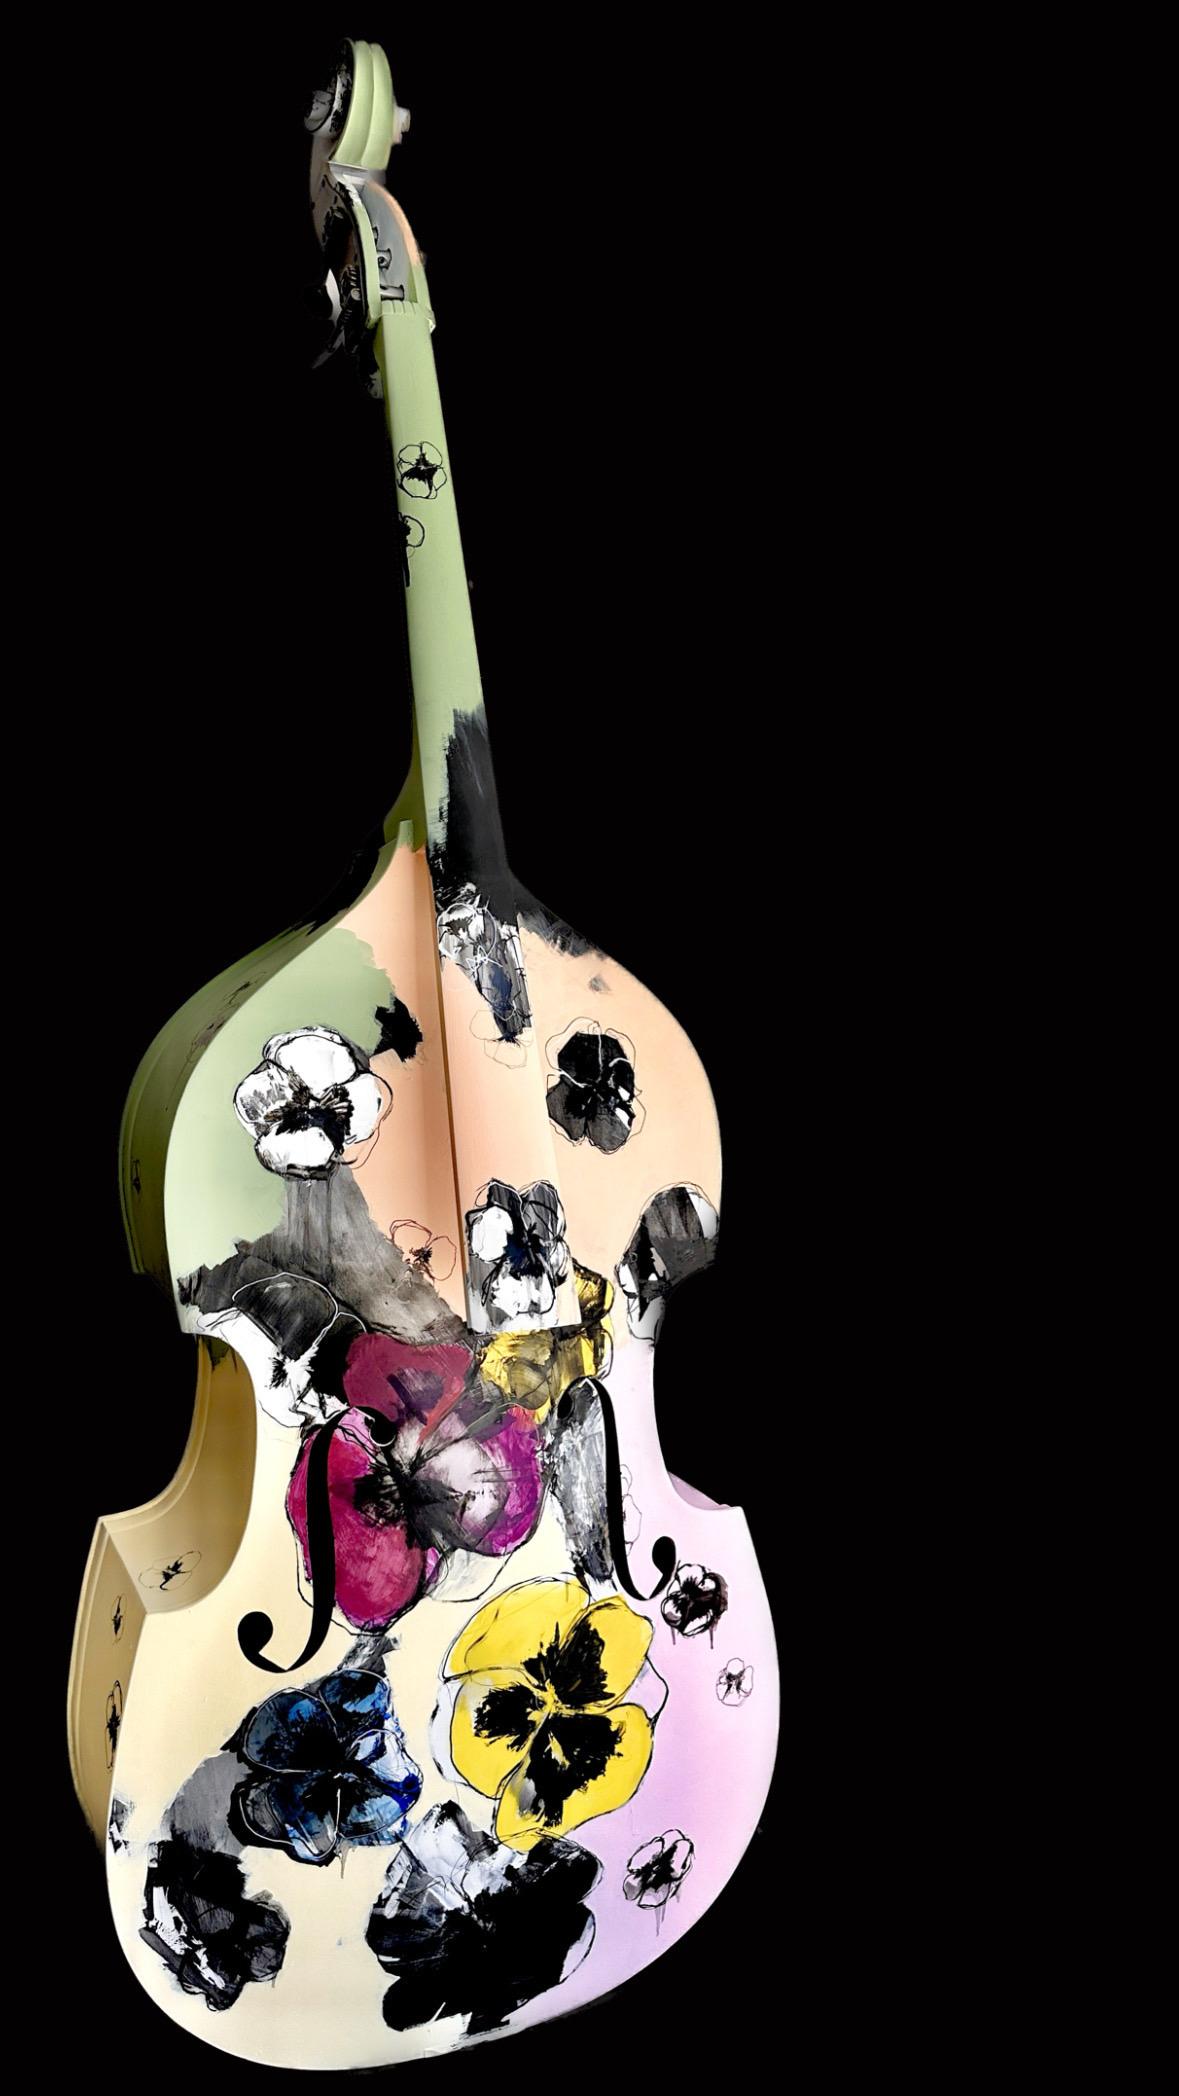 Abstract Symphony of Pansies,  Pansies art, oil on upright bass.  - Sculpture by KOKO HOVAGUIMIAN